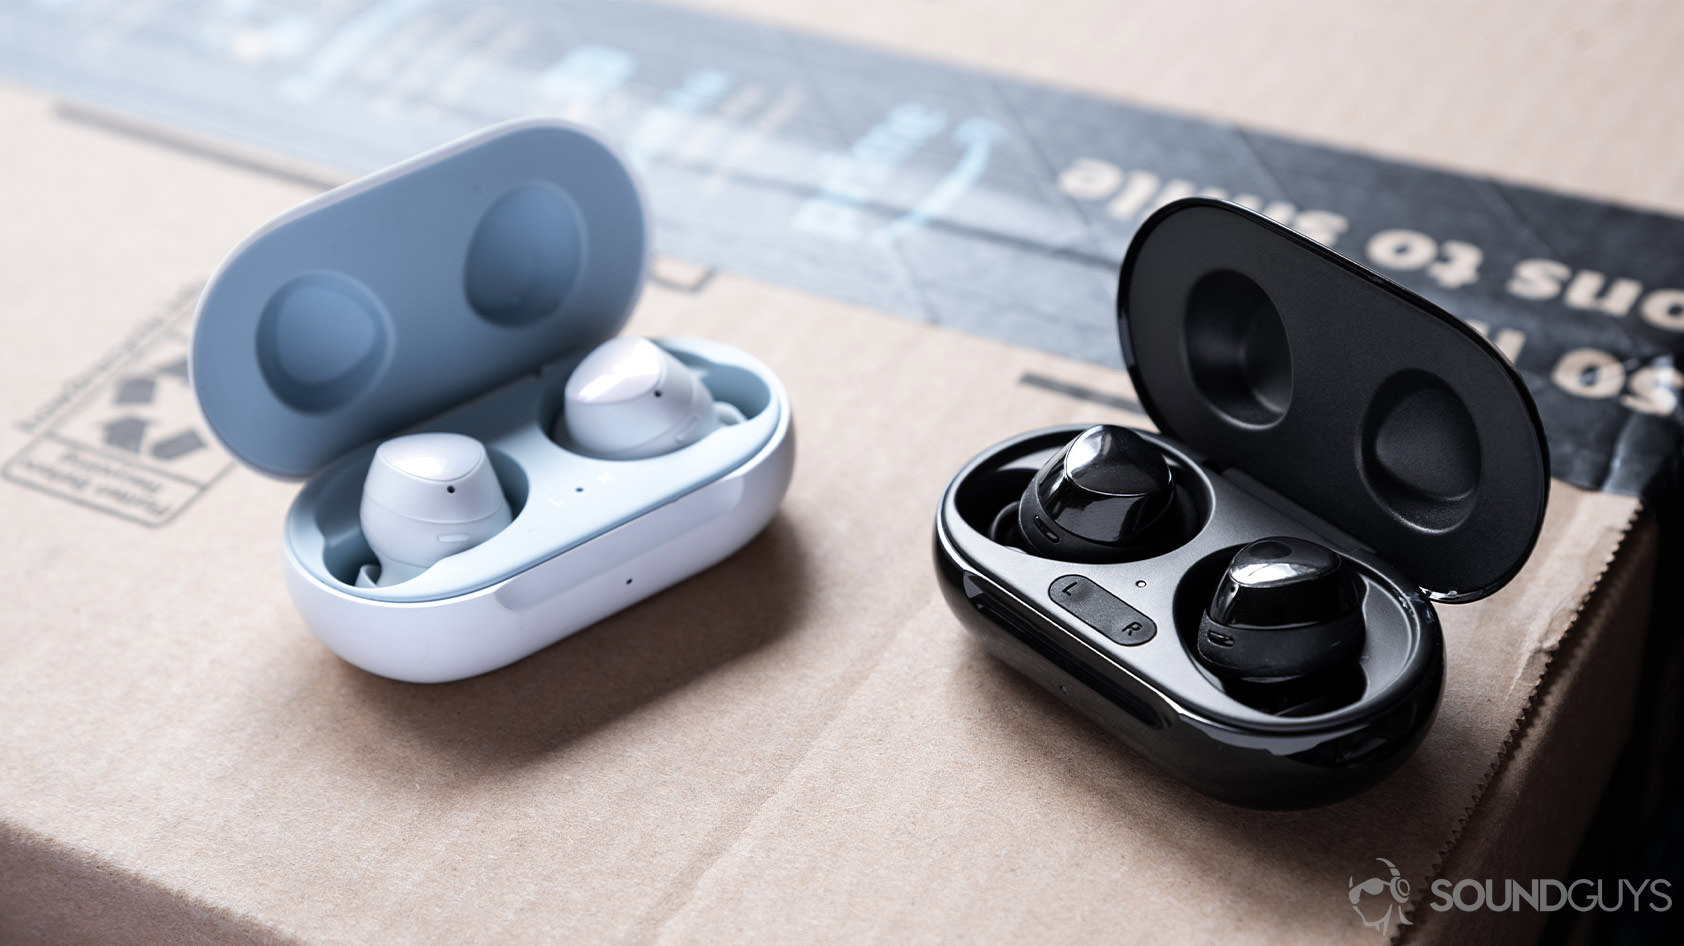 How to replace your Samsung Galaxy Buds earbuds - SoundGuys